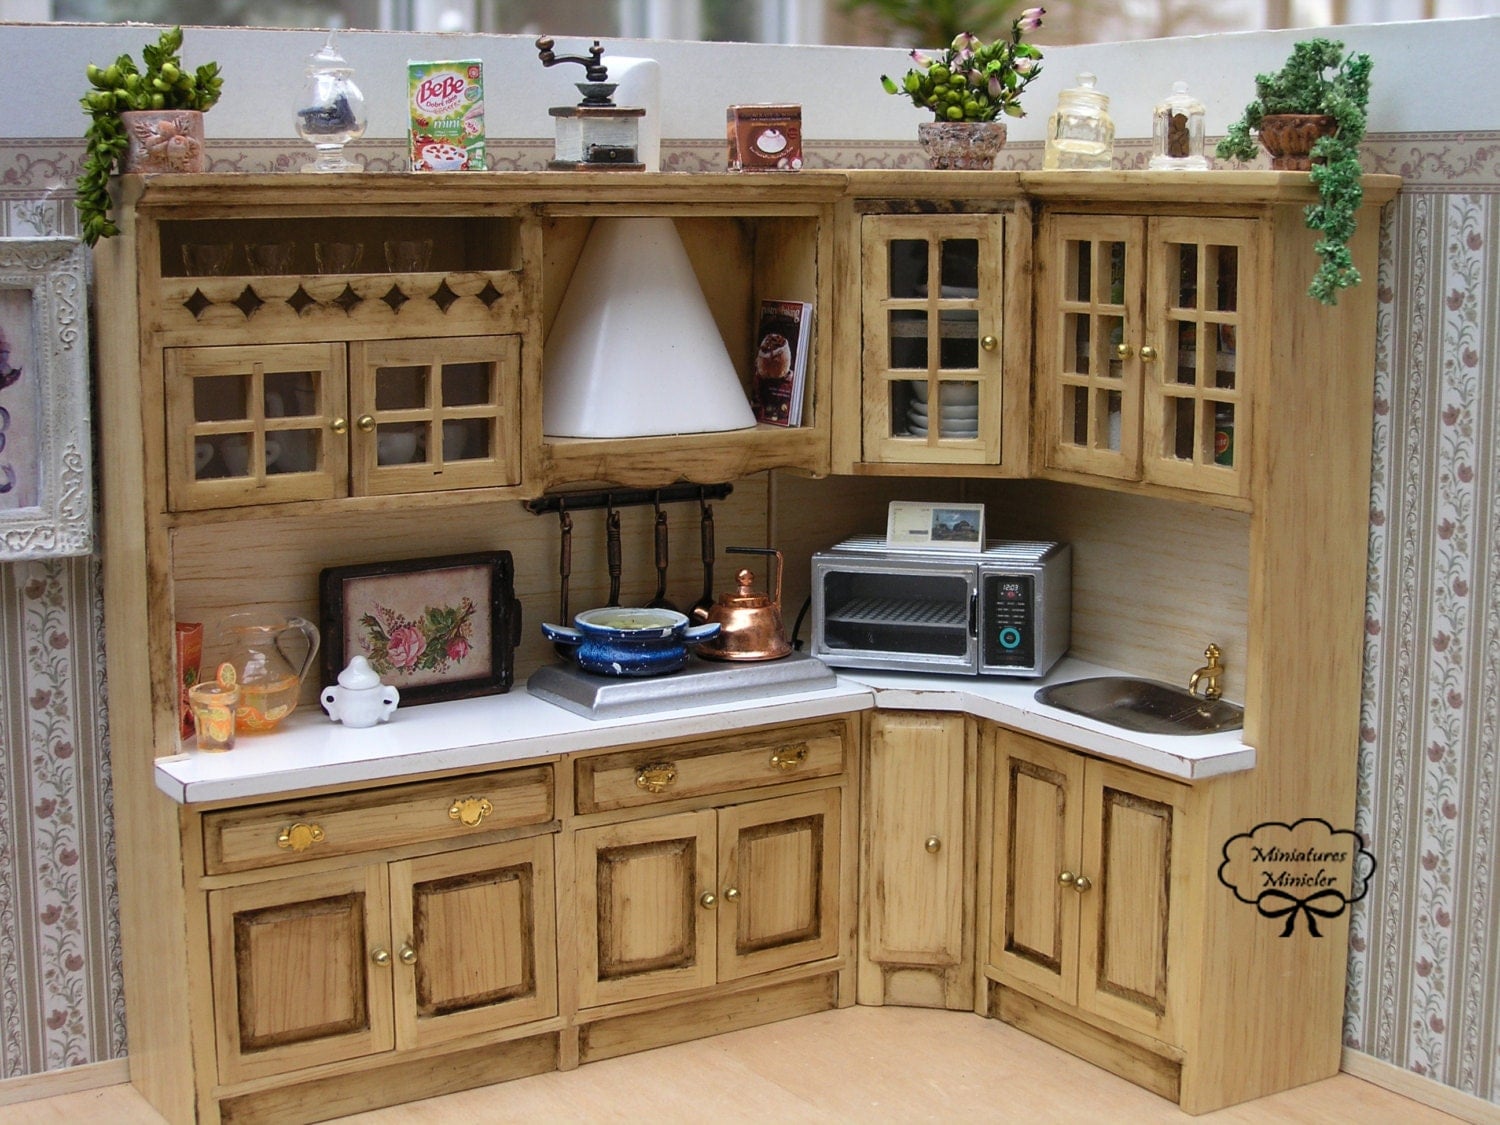 doll house kitchen table